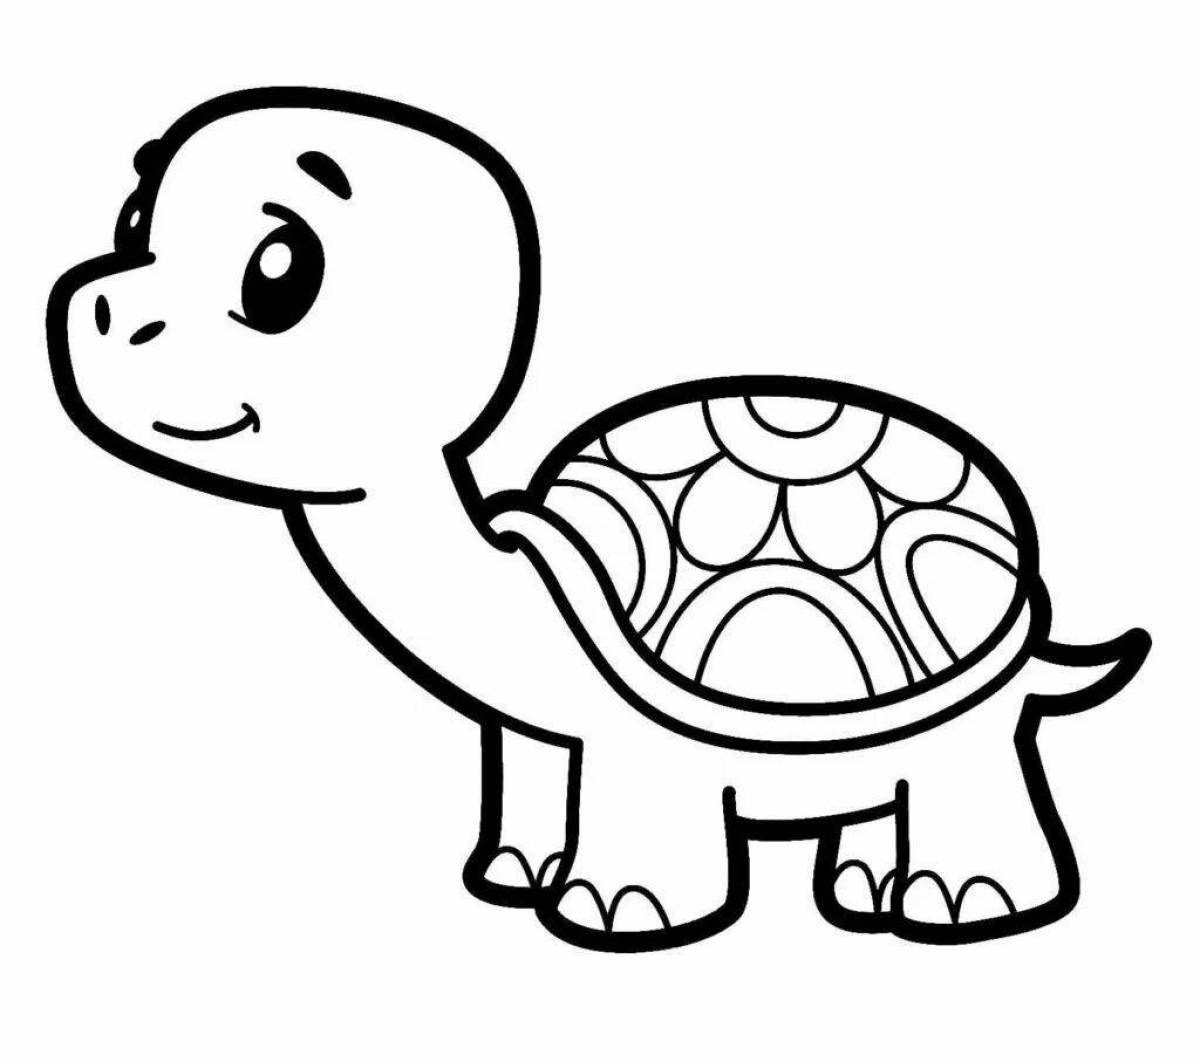 Fluffy turtle coloring pages